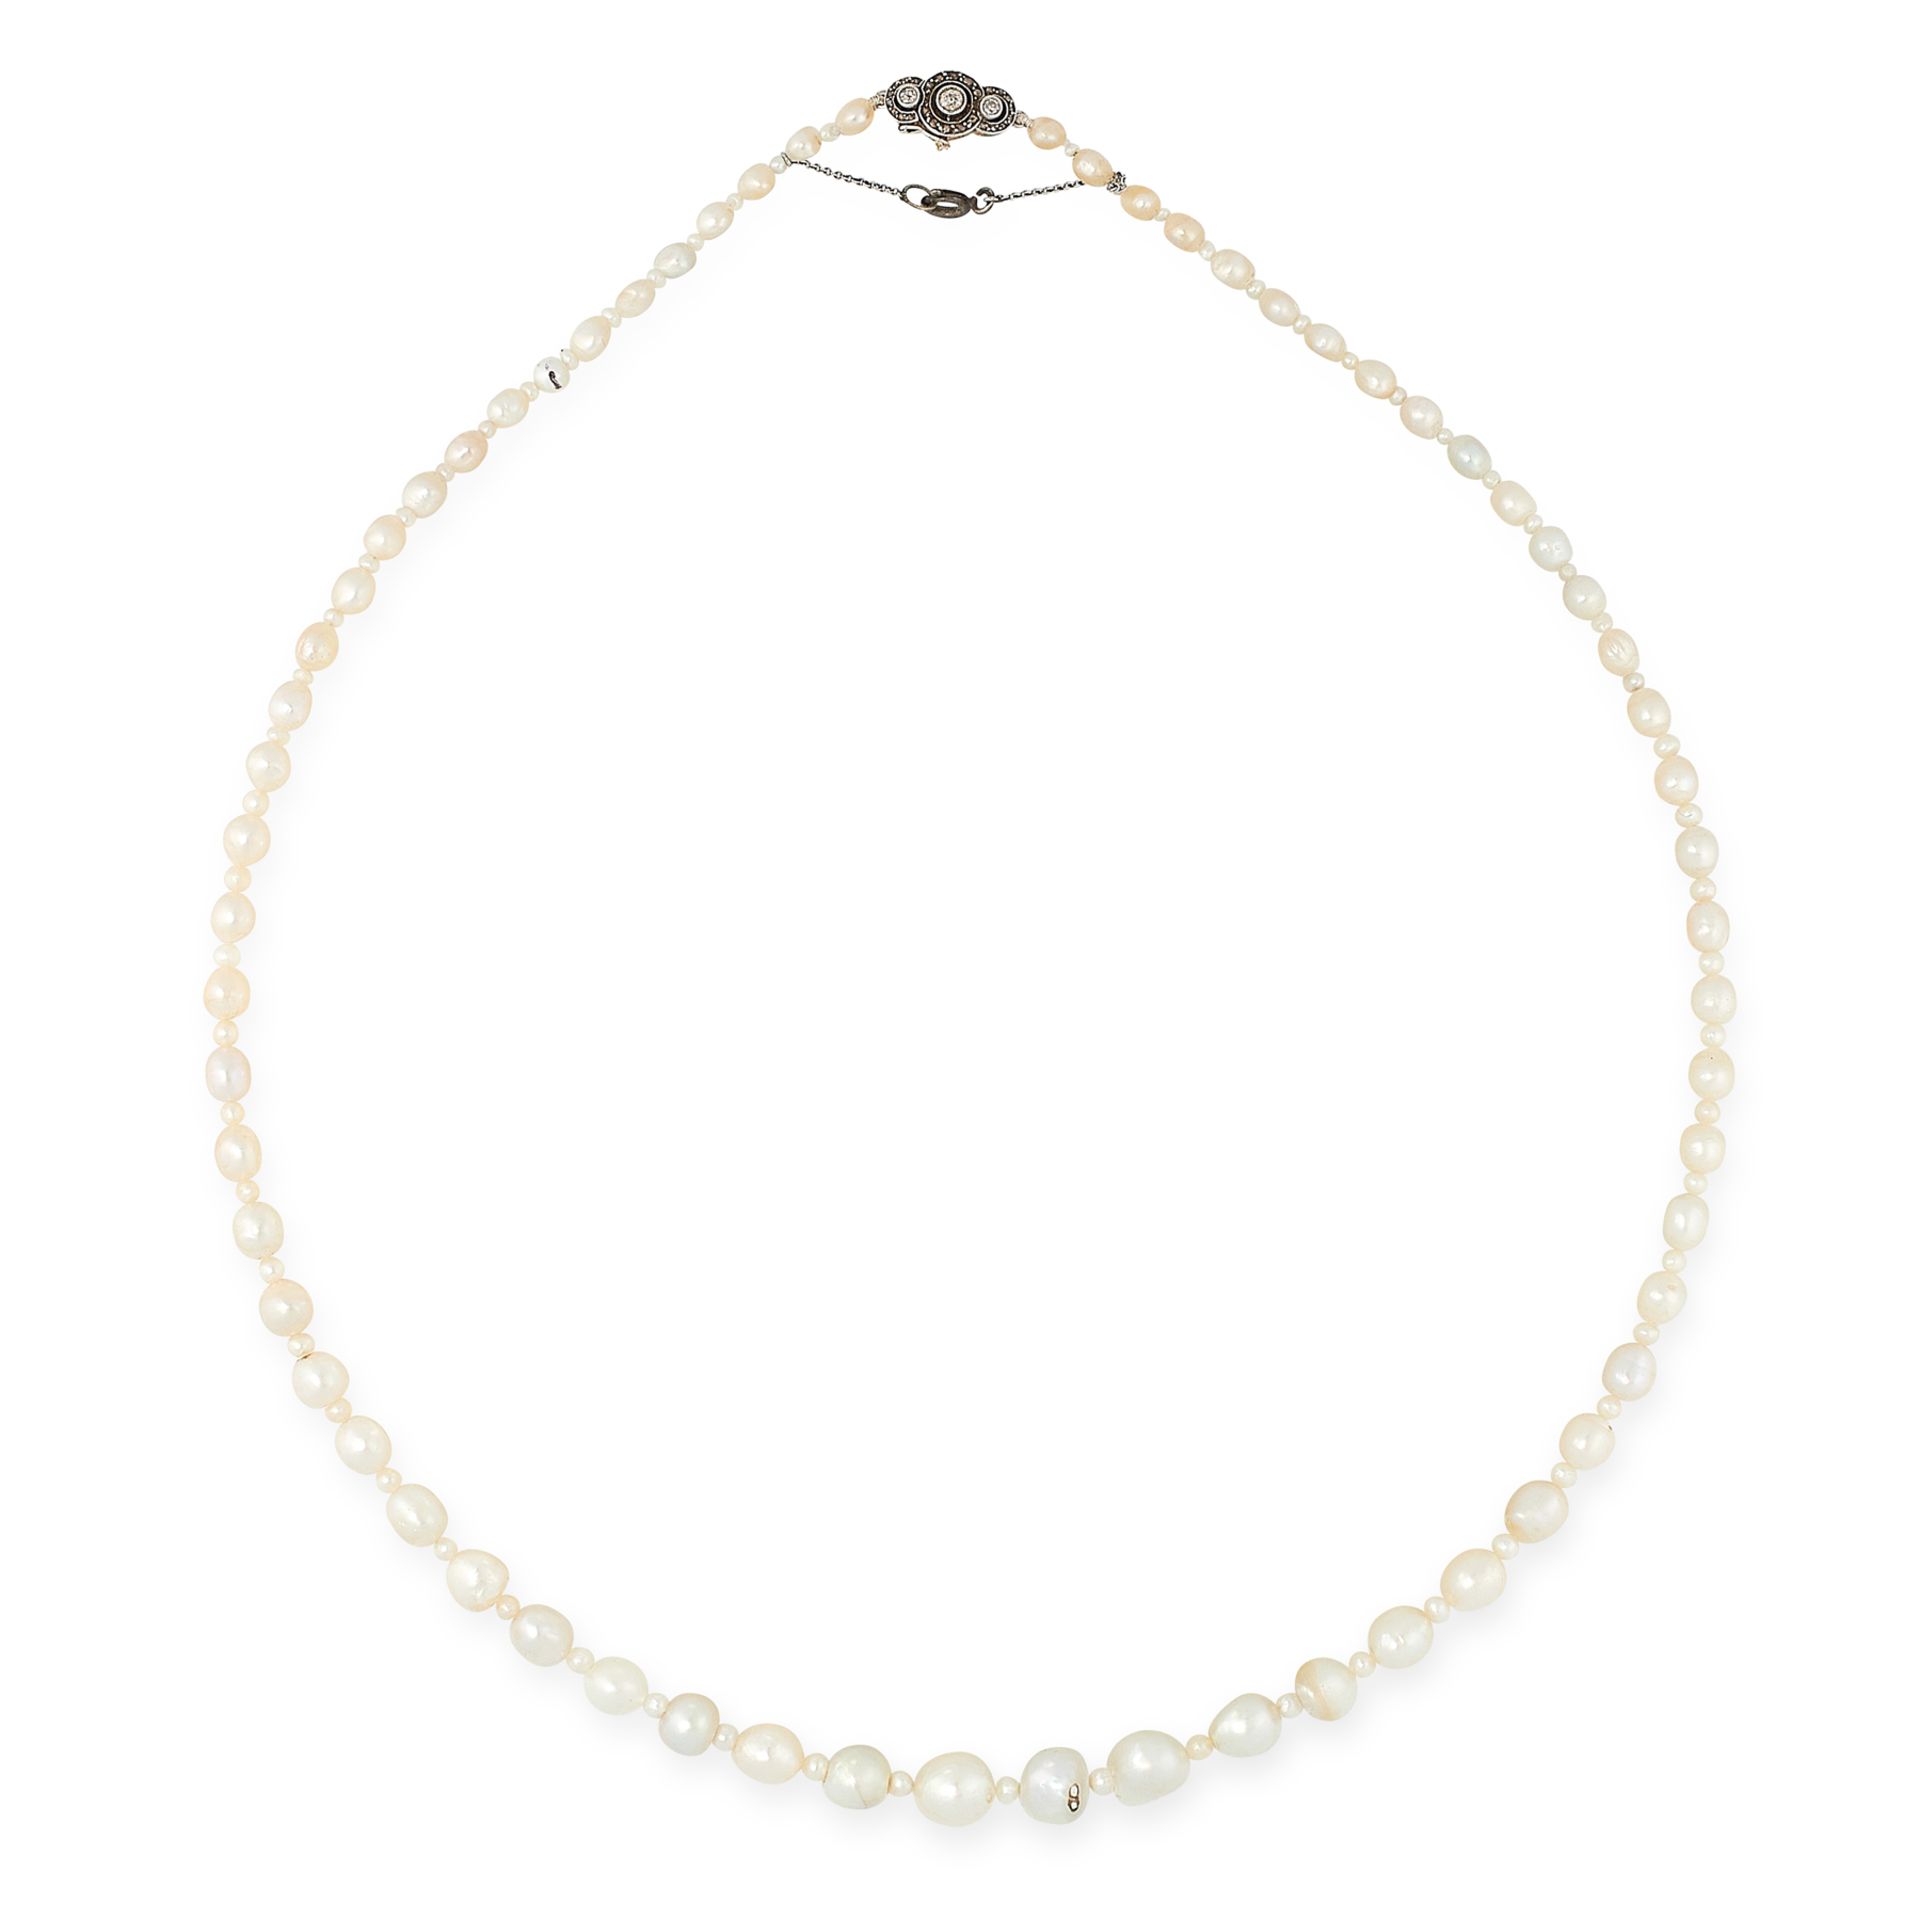 AN ANTIQUE NATURAL PEARL AND DIAMOND NECKLACE in yellow gold and silver, comprising a single row